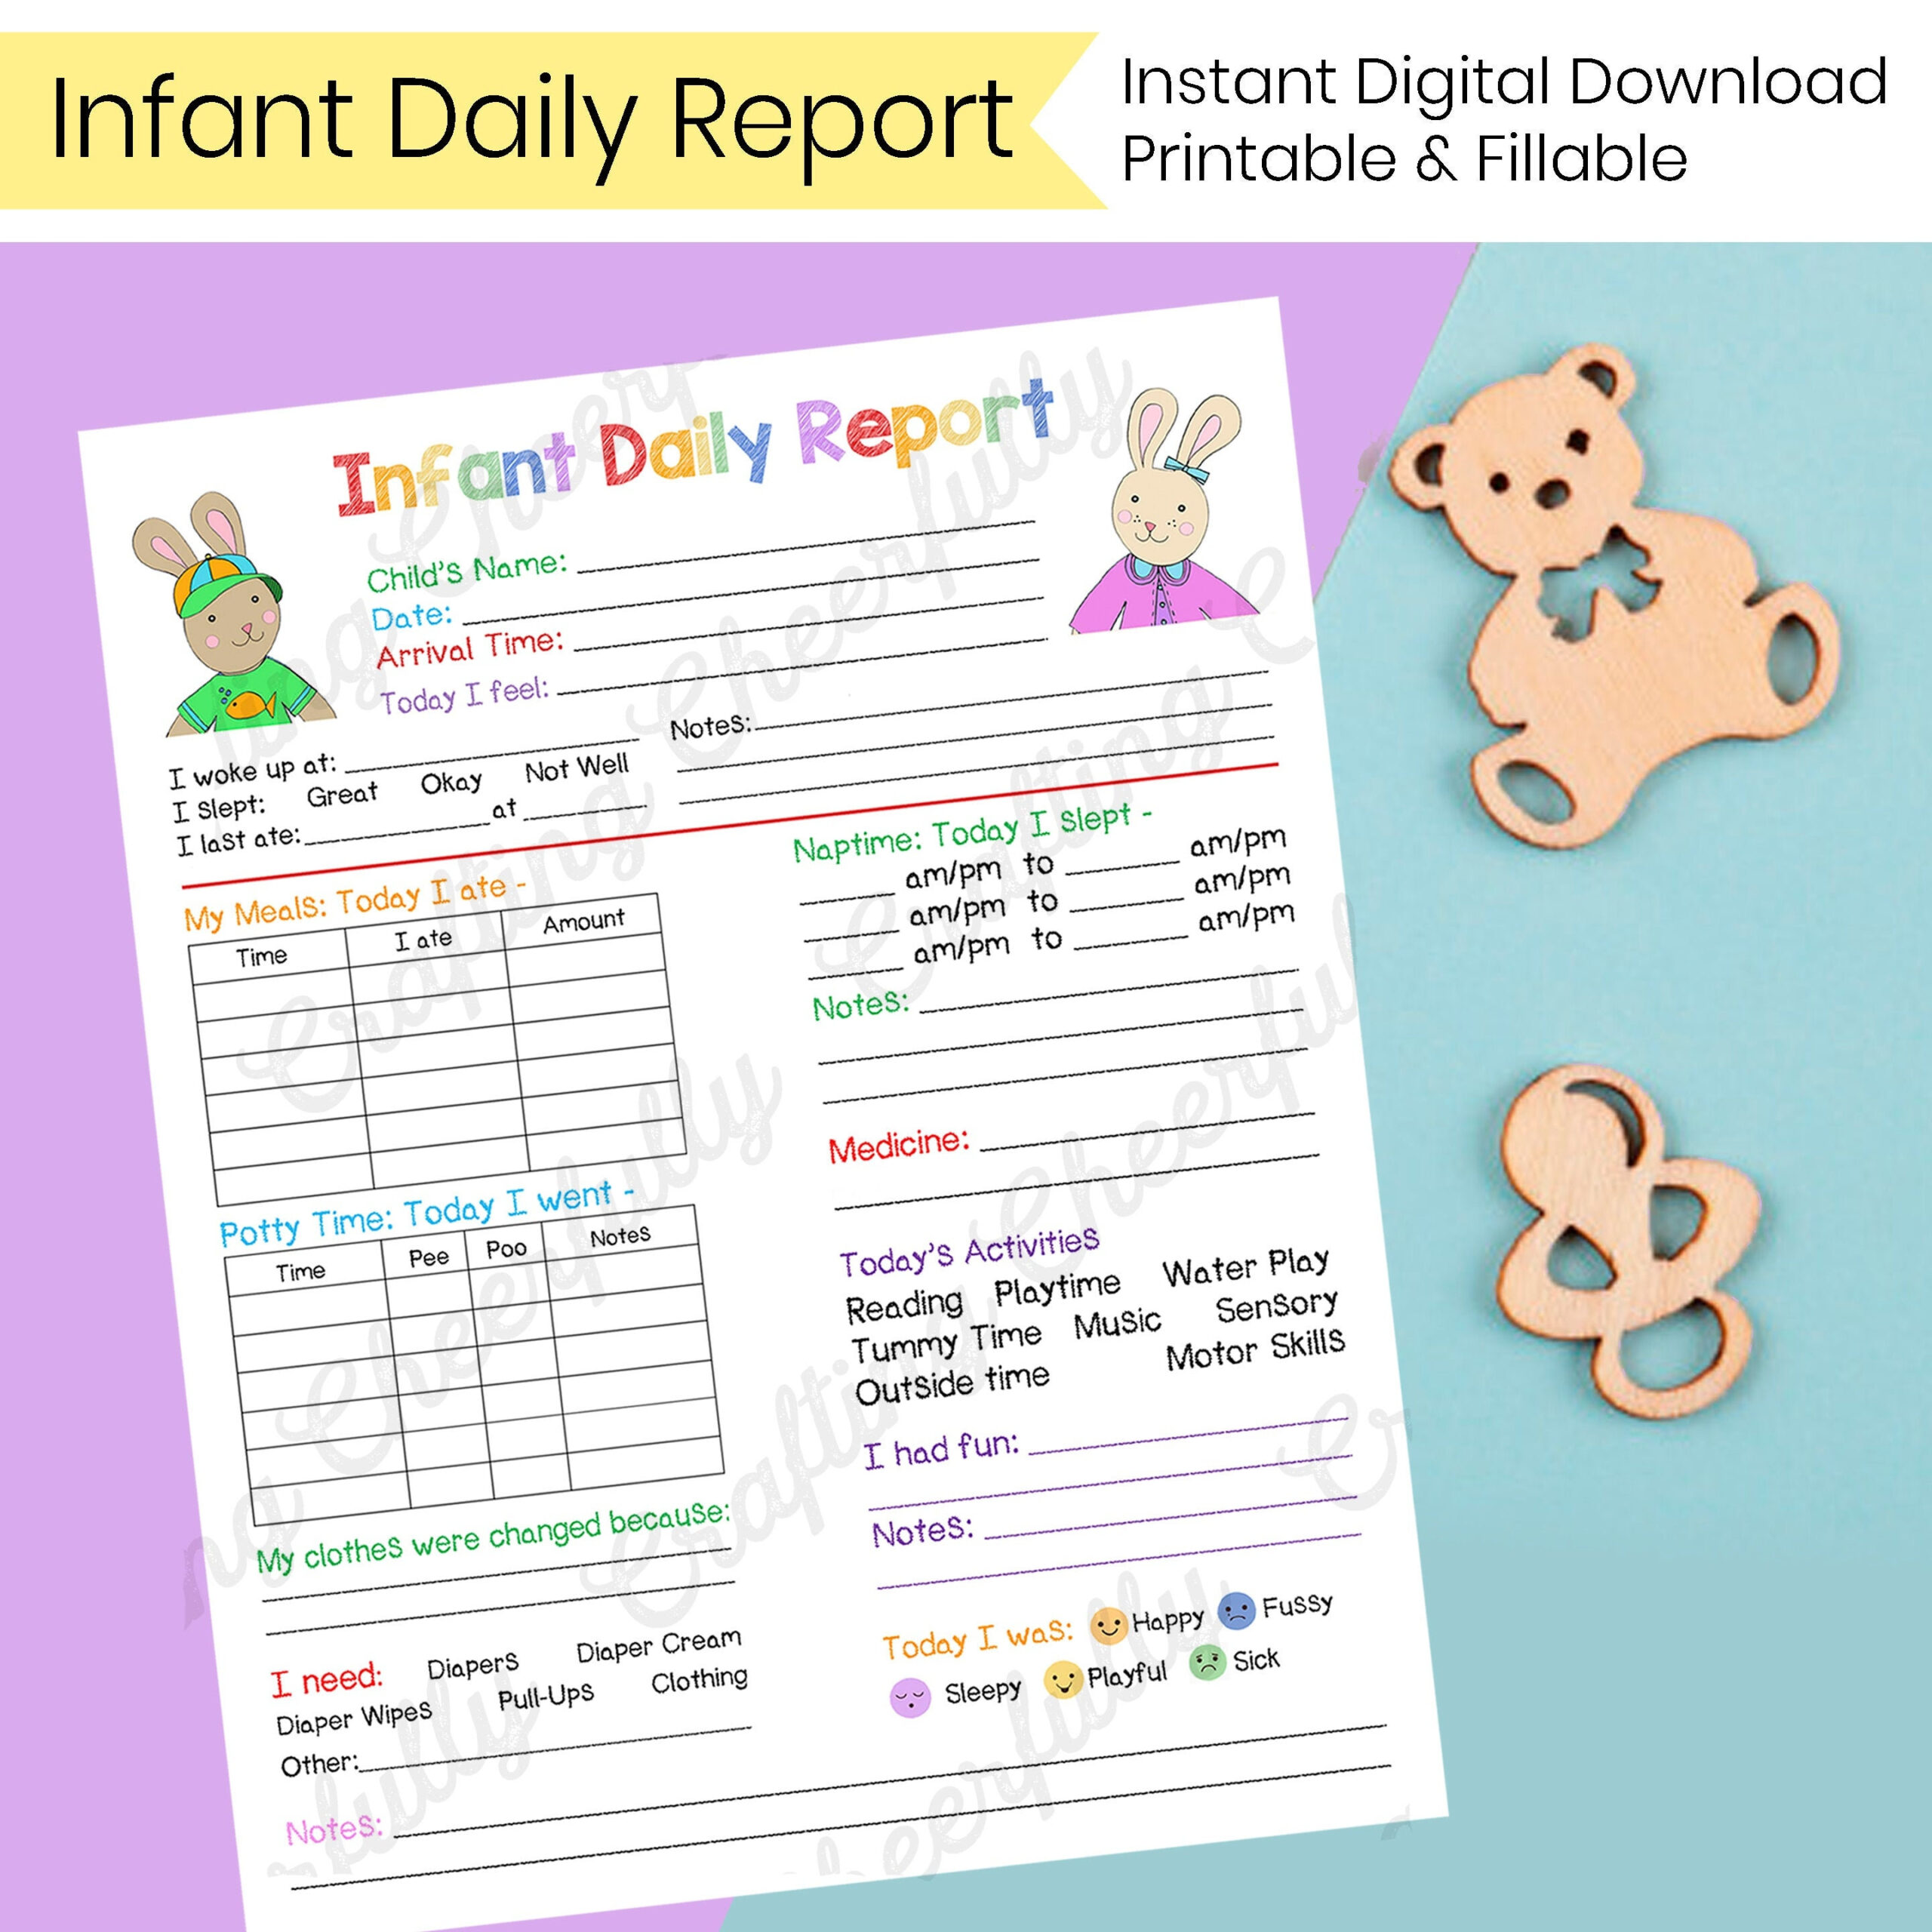 Infant Daily Report In-Home Preschool Daycare Nanny Log - Etsy Schweiz With Regard To Daycare Infant Daily Report Template